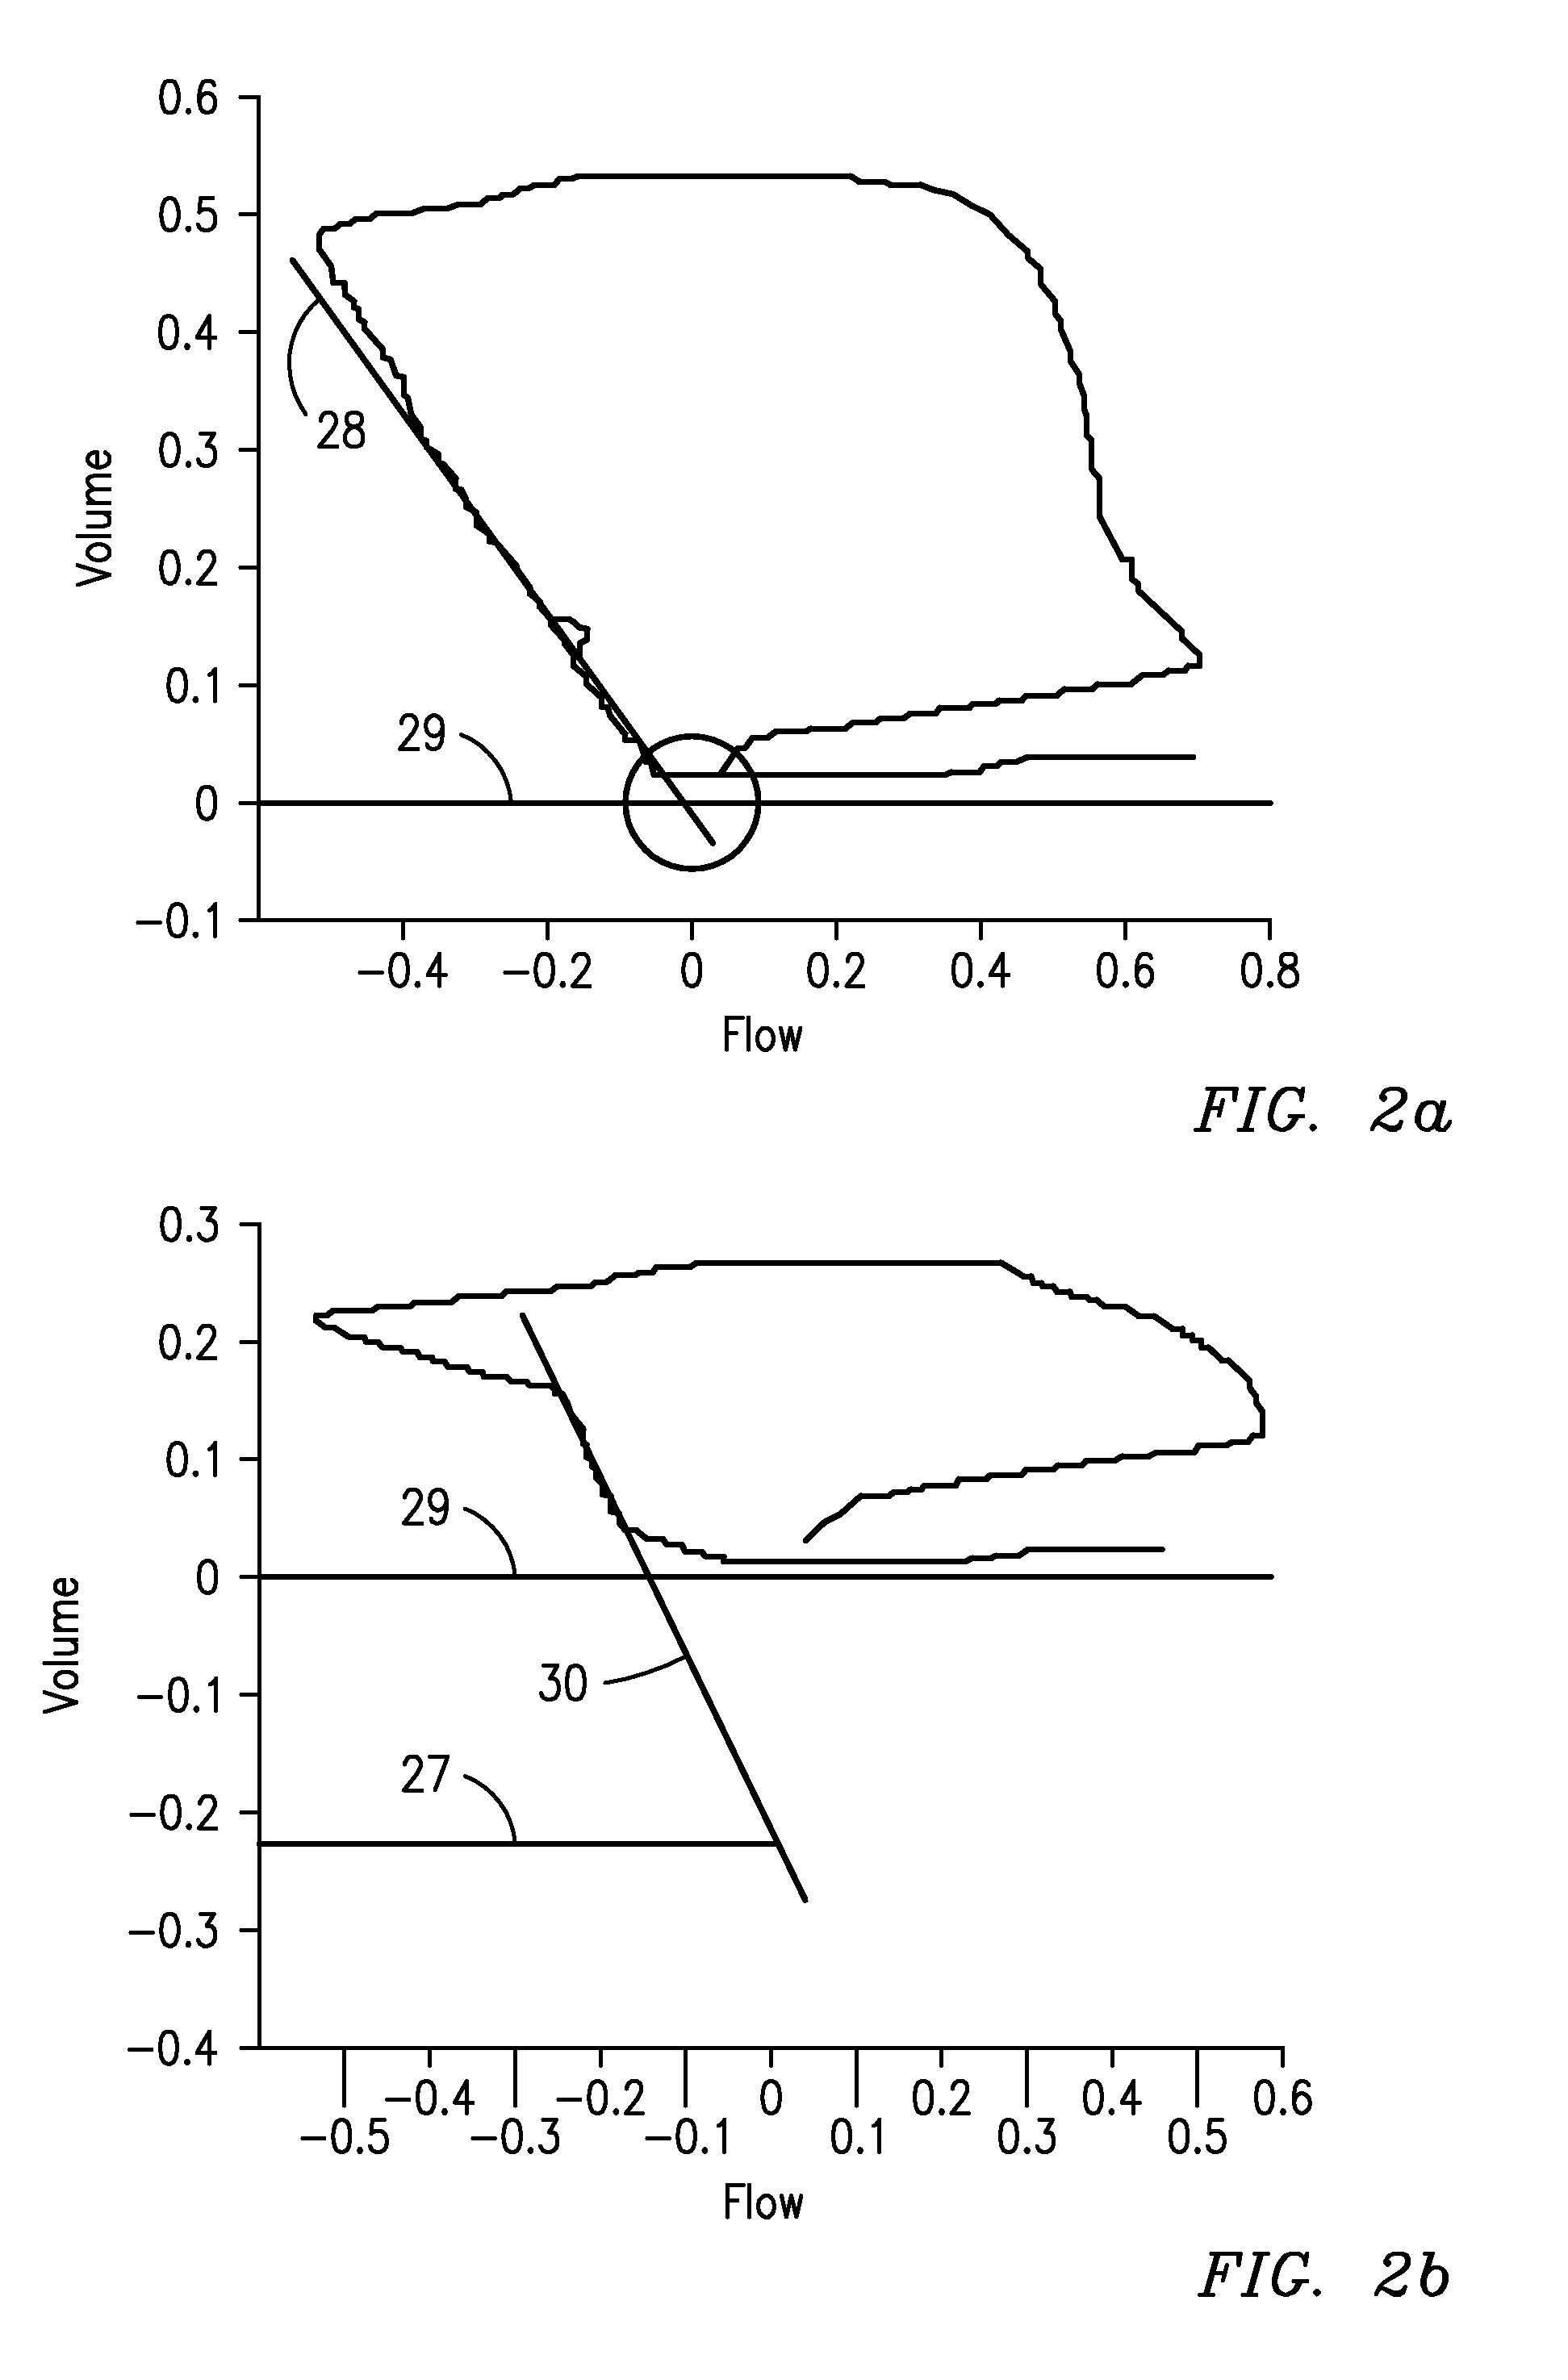 Method and apparatus for detecting and quantifying intrinsic positive end-expiratory pressure